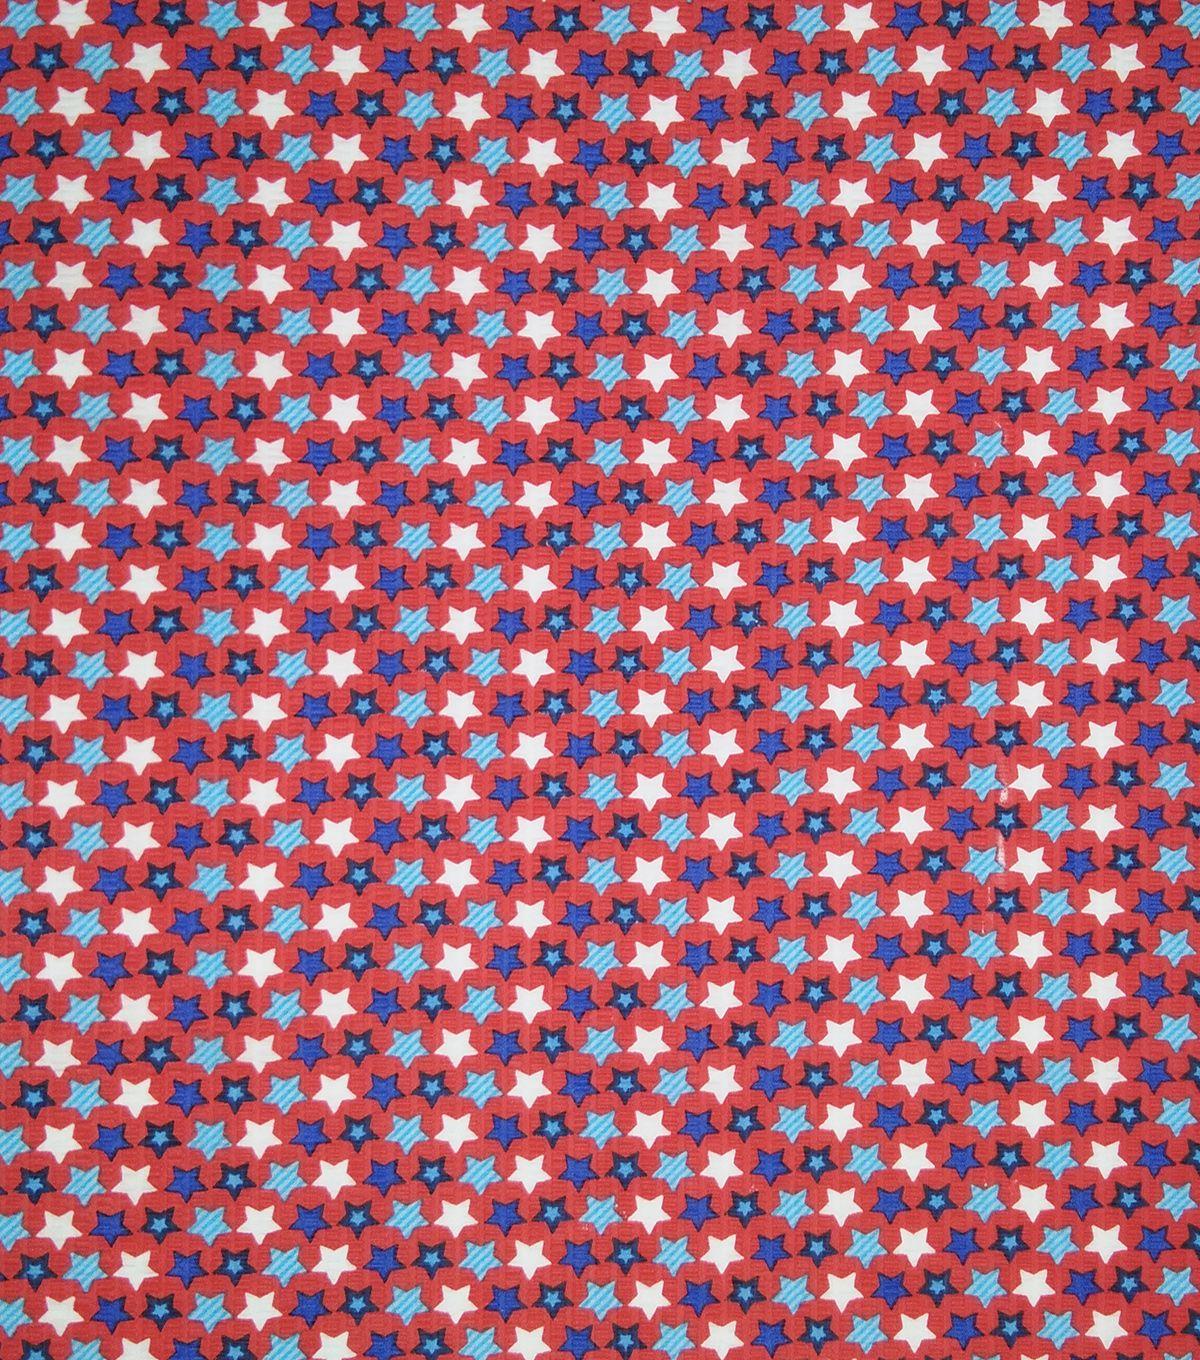 Cool Red White and Blue Star Logo - Doodles Textured Fabric 43''-Red, White & Blue Star Spangled